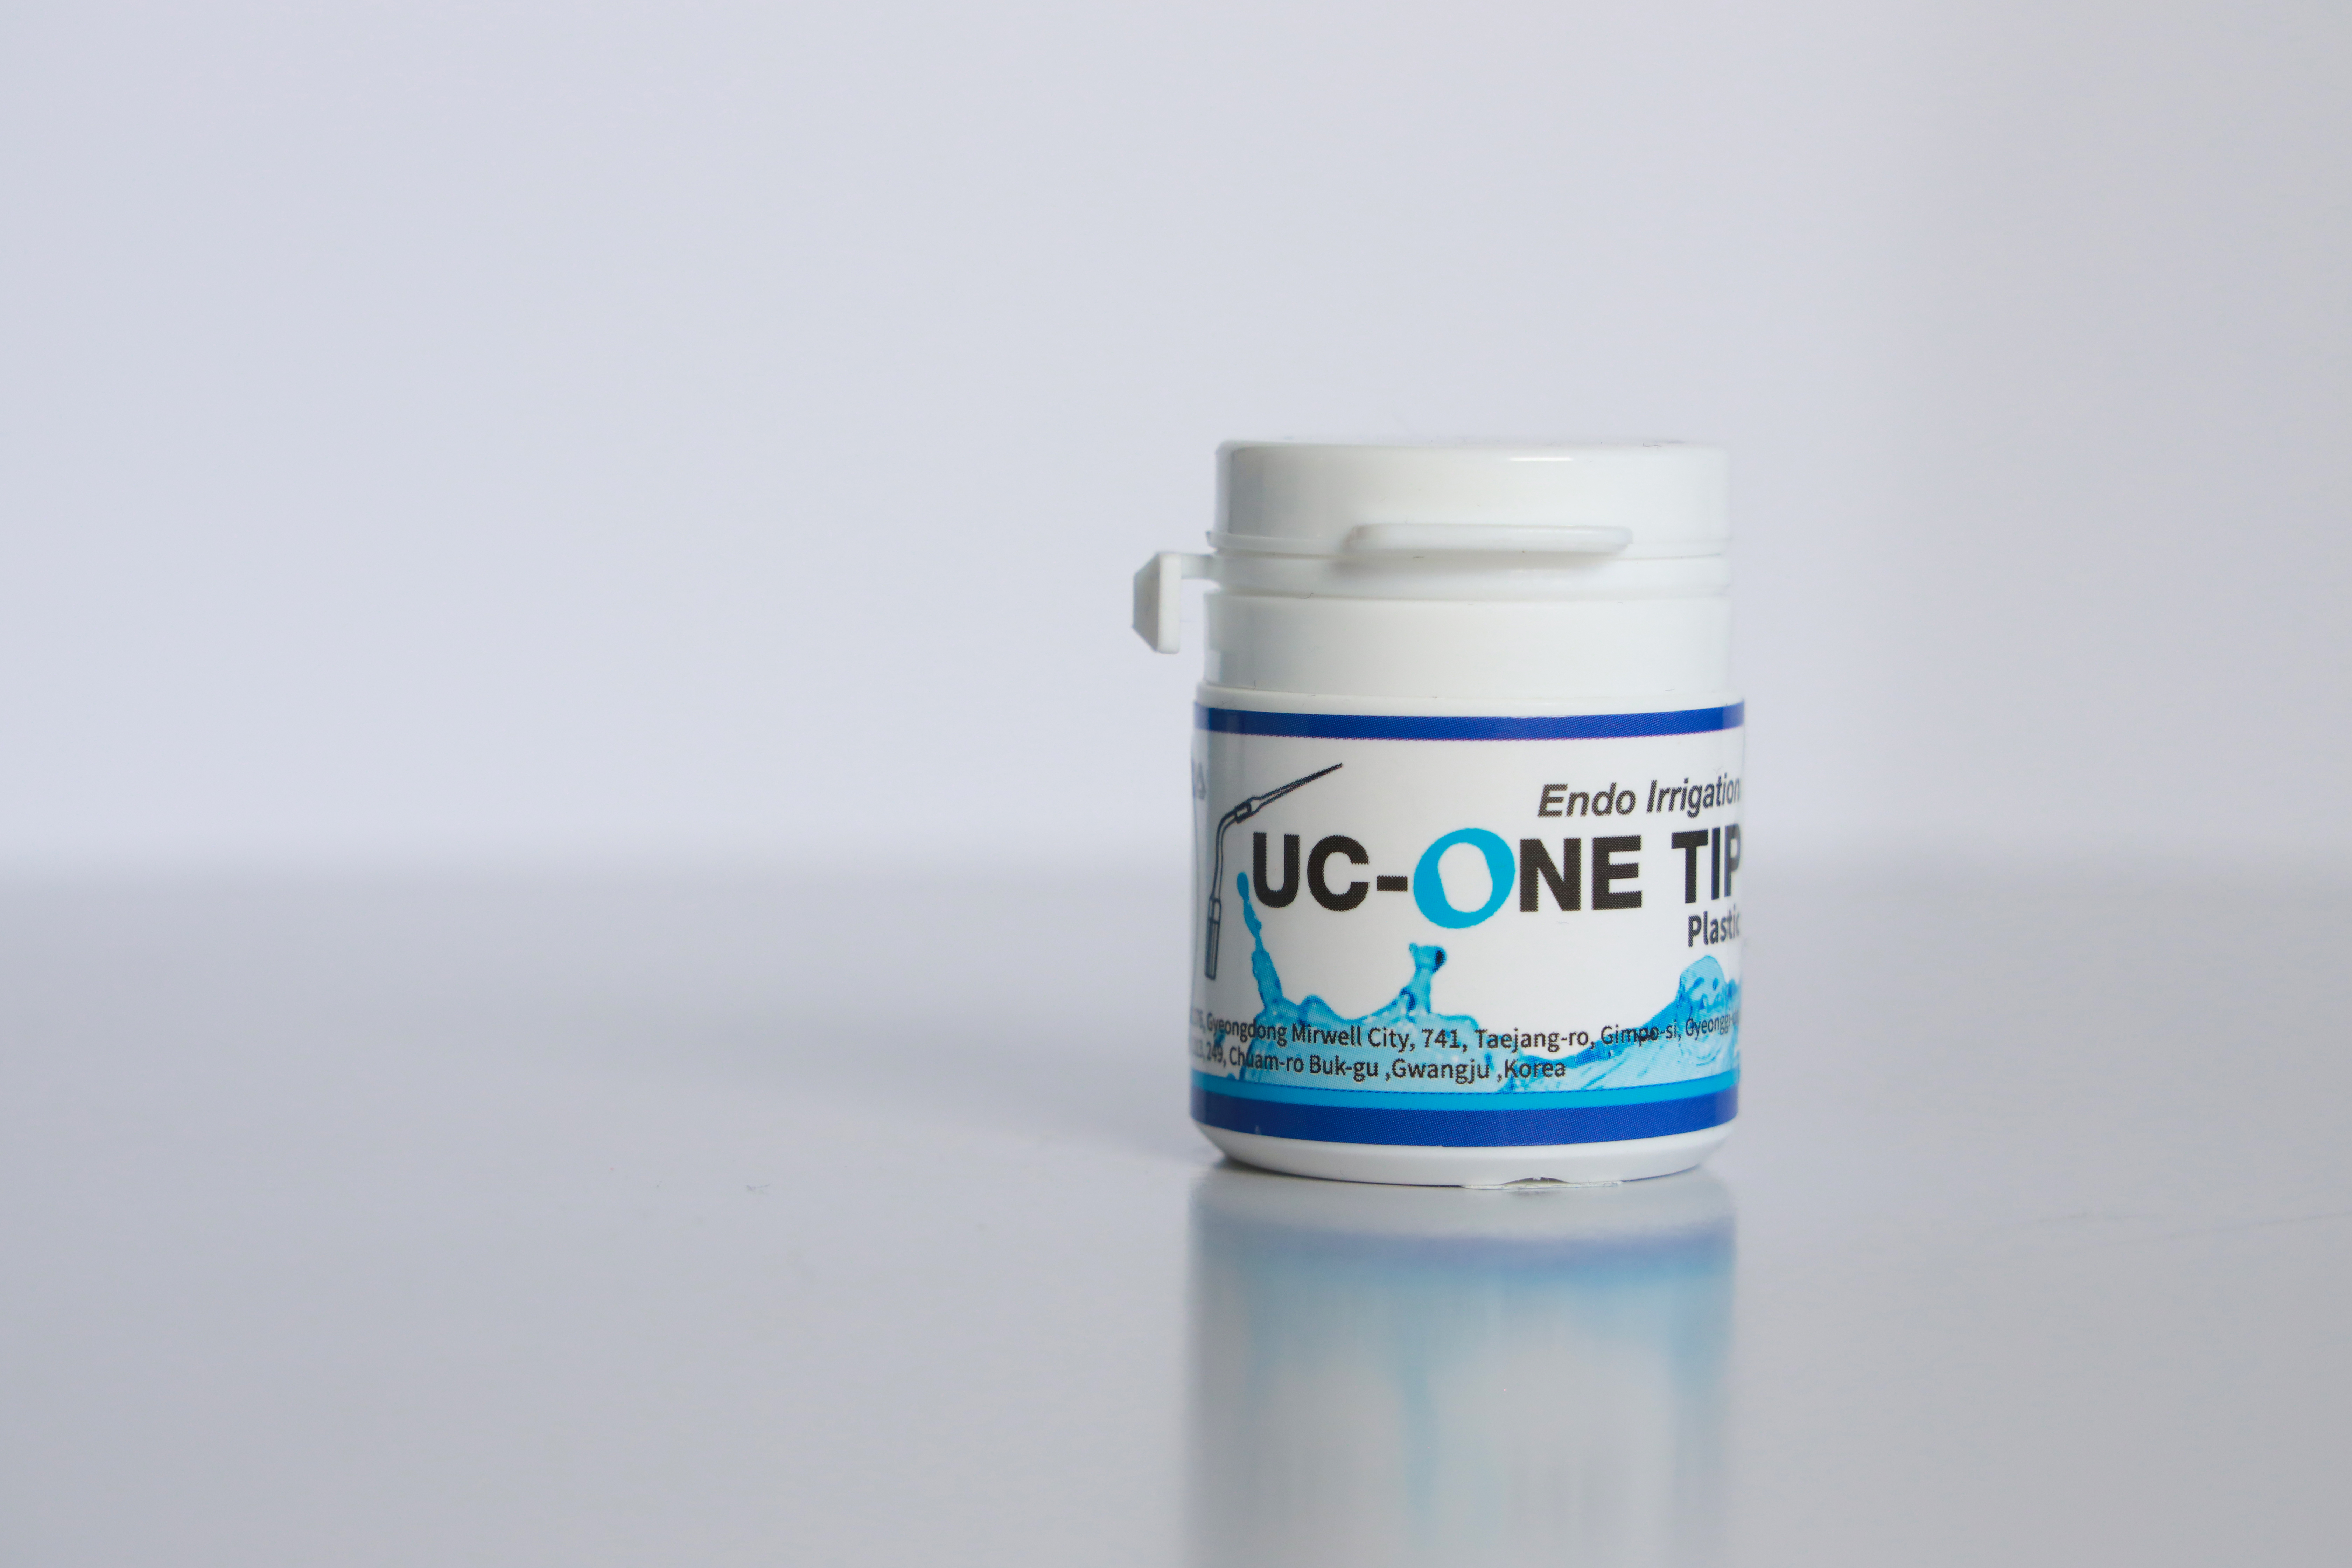 UC-One disposable plastic tips